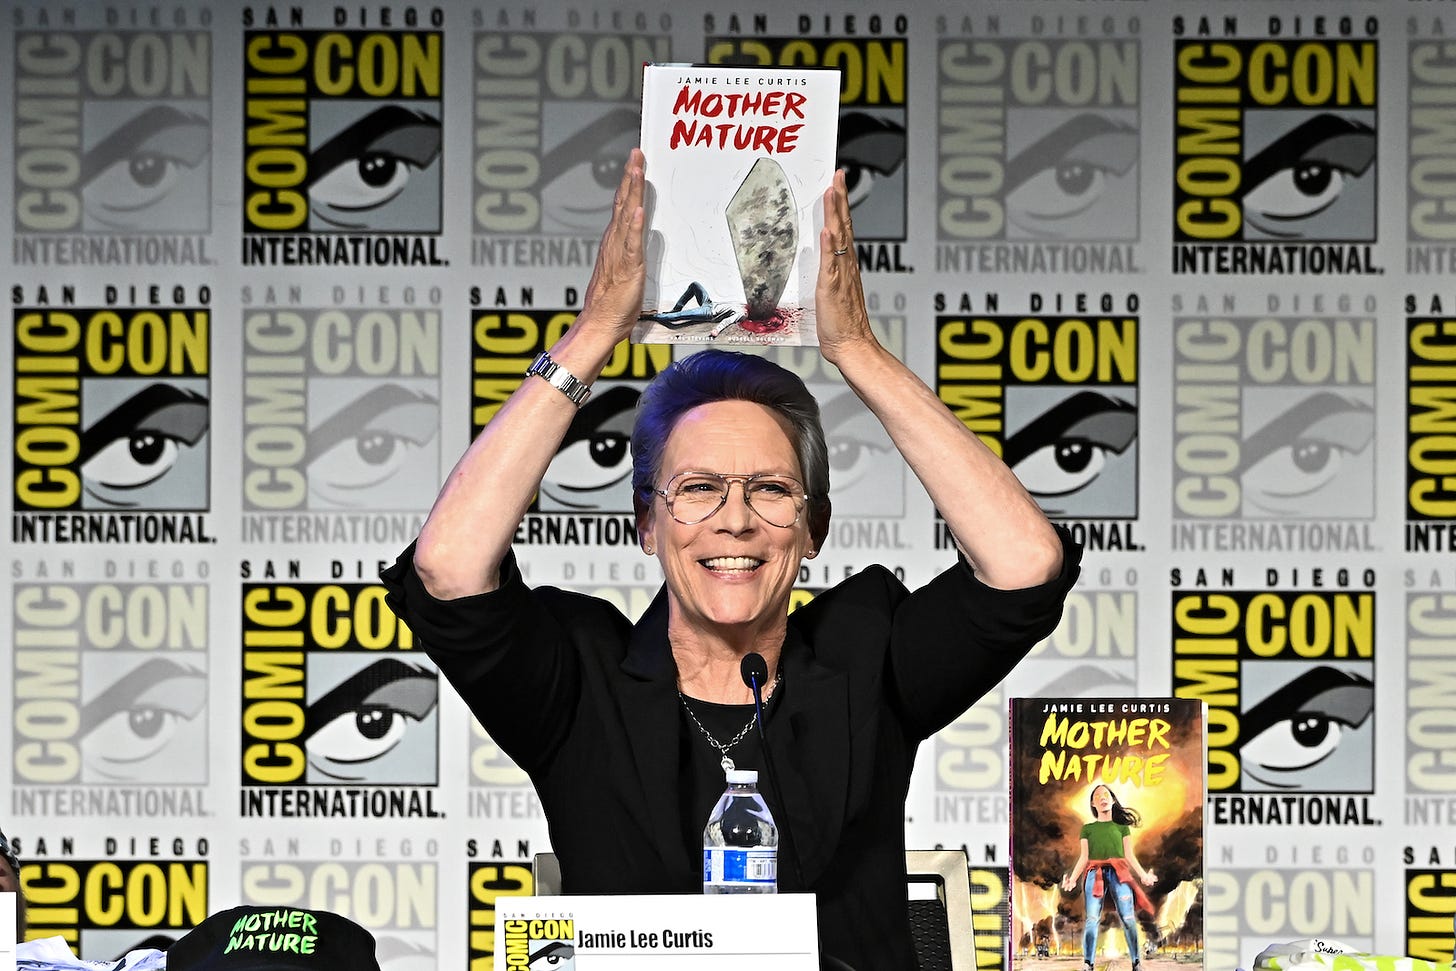 Actor Jamie Lee Curtis holds a hardcover comic book above her head called Mother Nature. She is wearing a black shirt and glasses. She sits at a table; behind her is the Comic Con logo